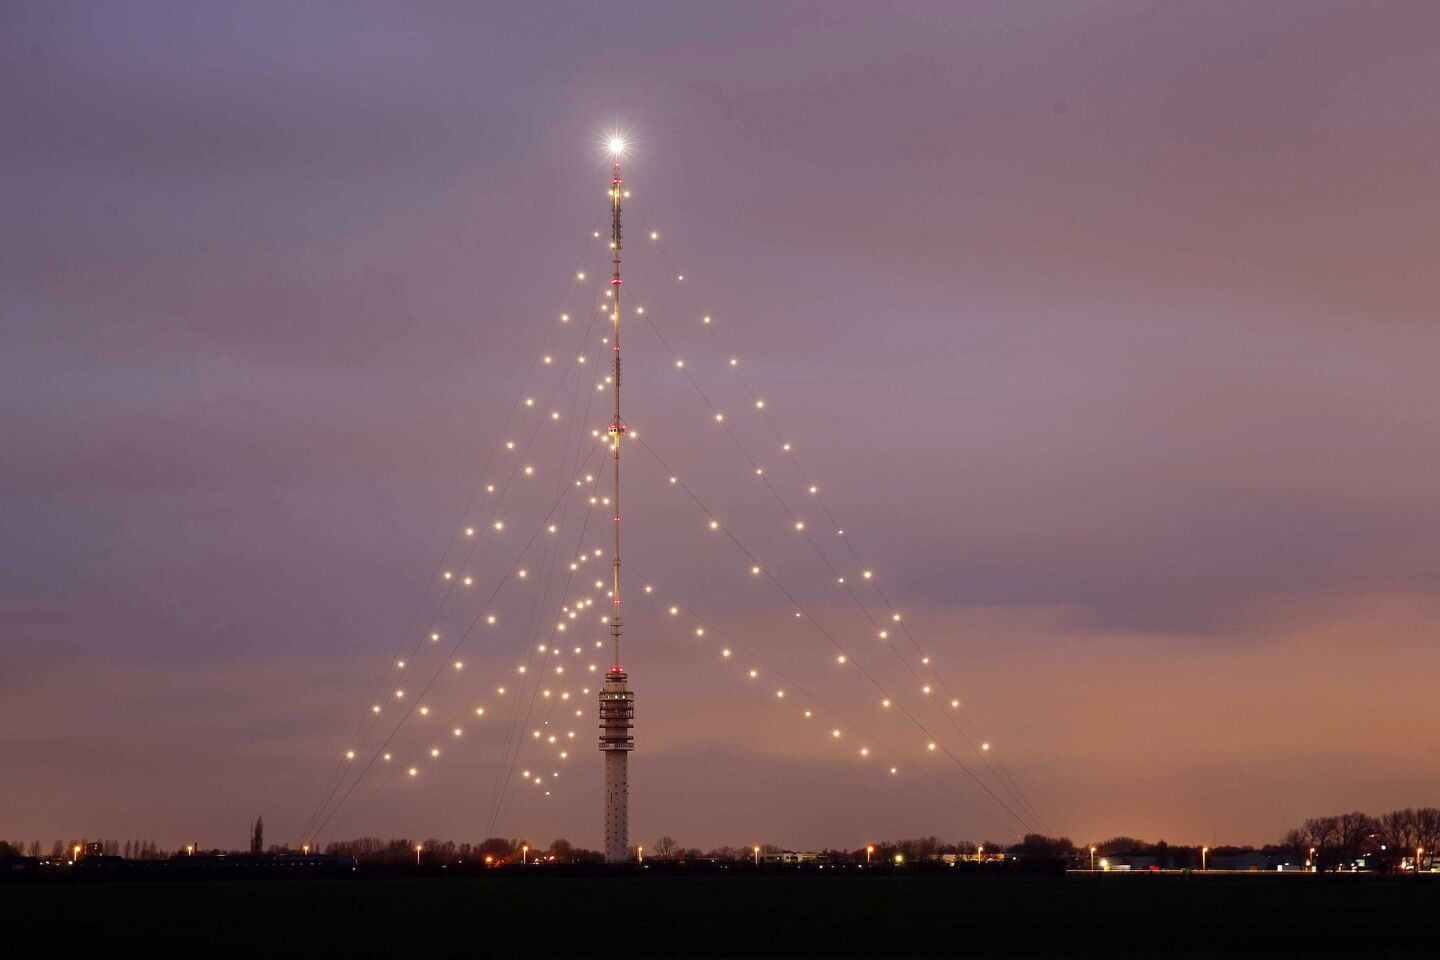 It's billed as the world's largest Christmas tree, even though it's not a tree at all: Holiday lights adorn the Gerbrandy Tower in IJsselstein, The Netherlands. (It's a radio and broadcast tower that stands 1,203.41 feet tall.)